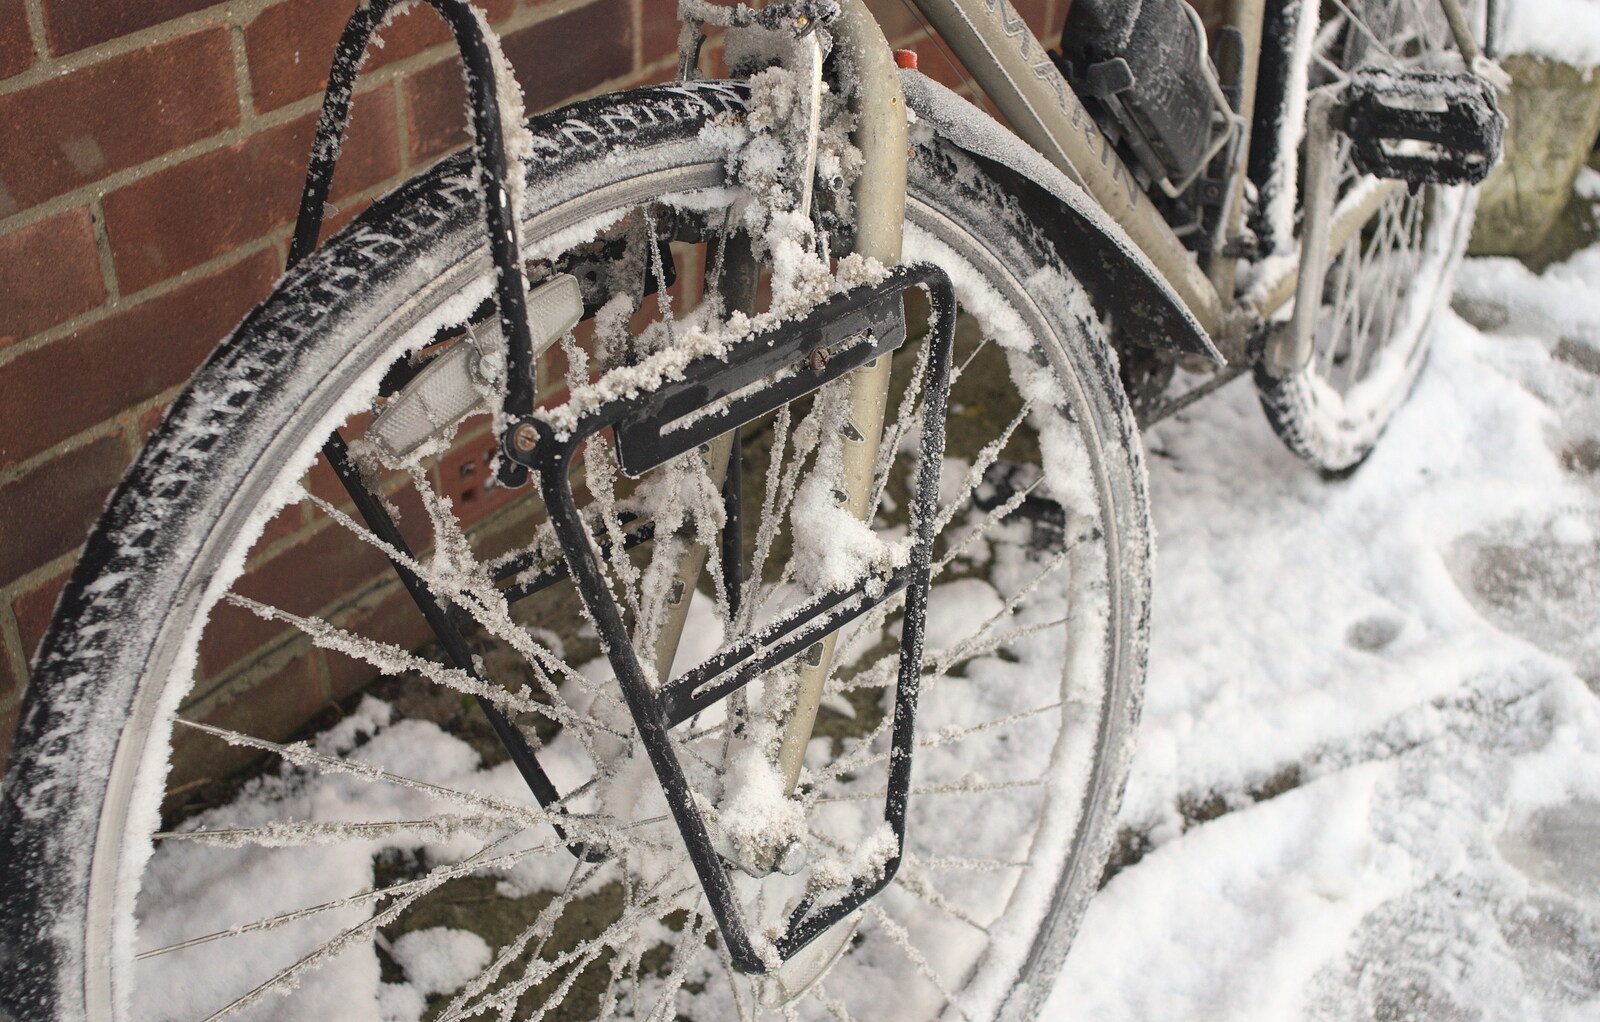 Nosher's bike is snowed under from A Couple of Snow Days, Brome, Suffolk - 16th January 2013